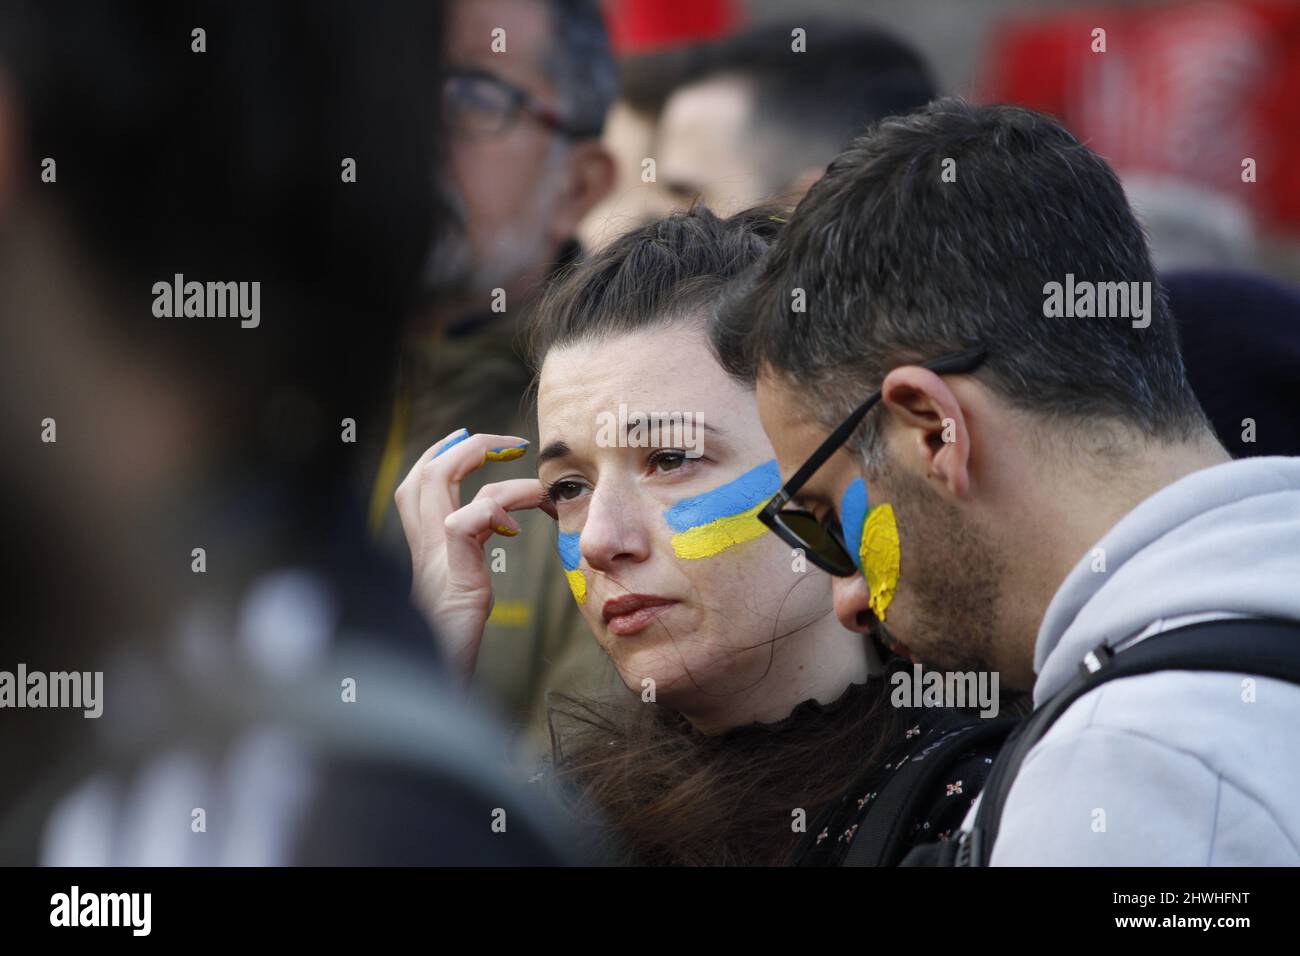 5th March 2022 Anti War protest- People in Rome Italy demonstrate against the war in Ukraine. Stock Photo